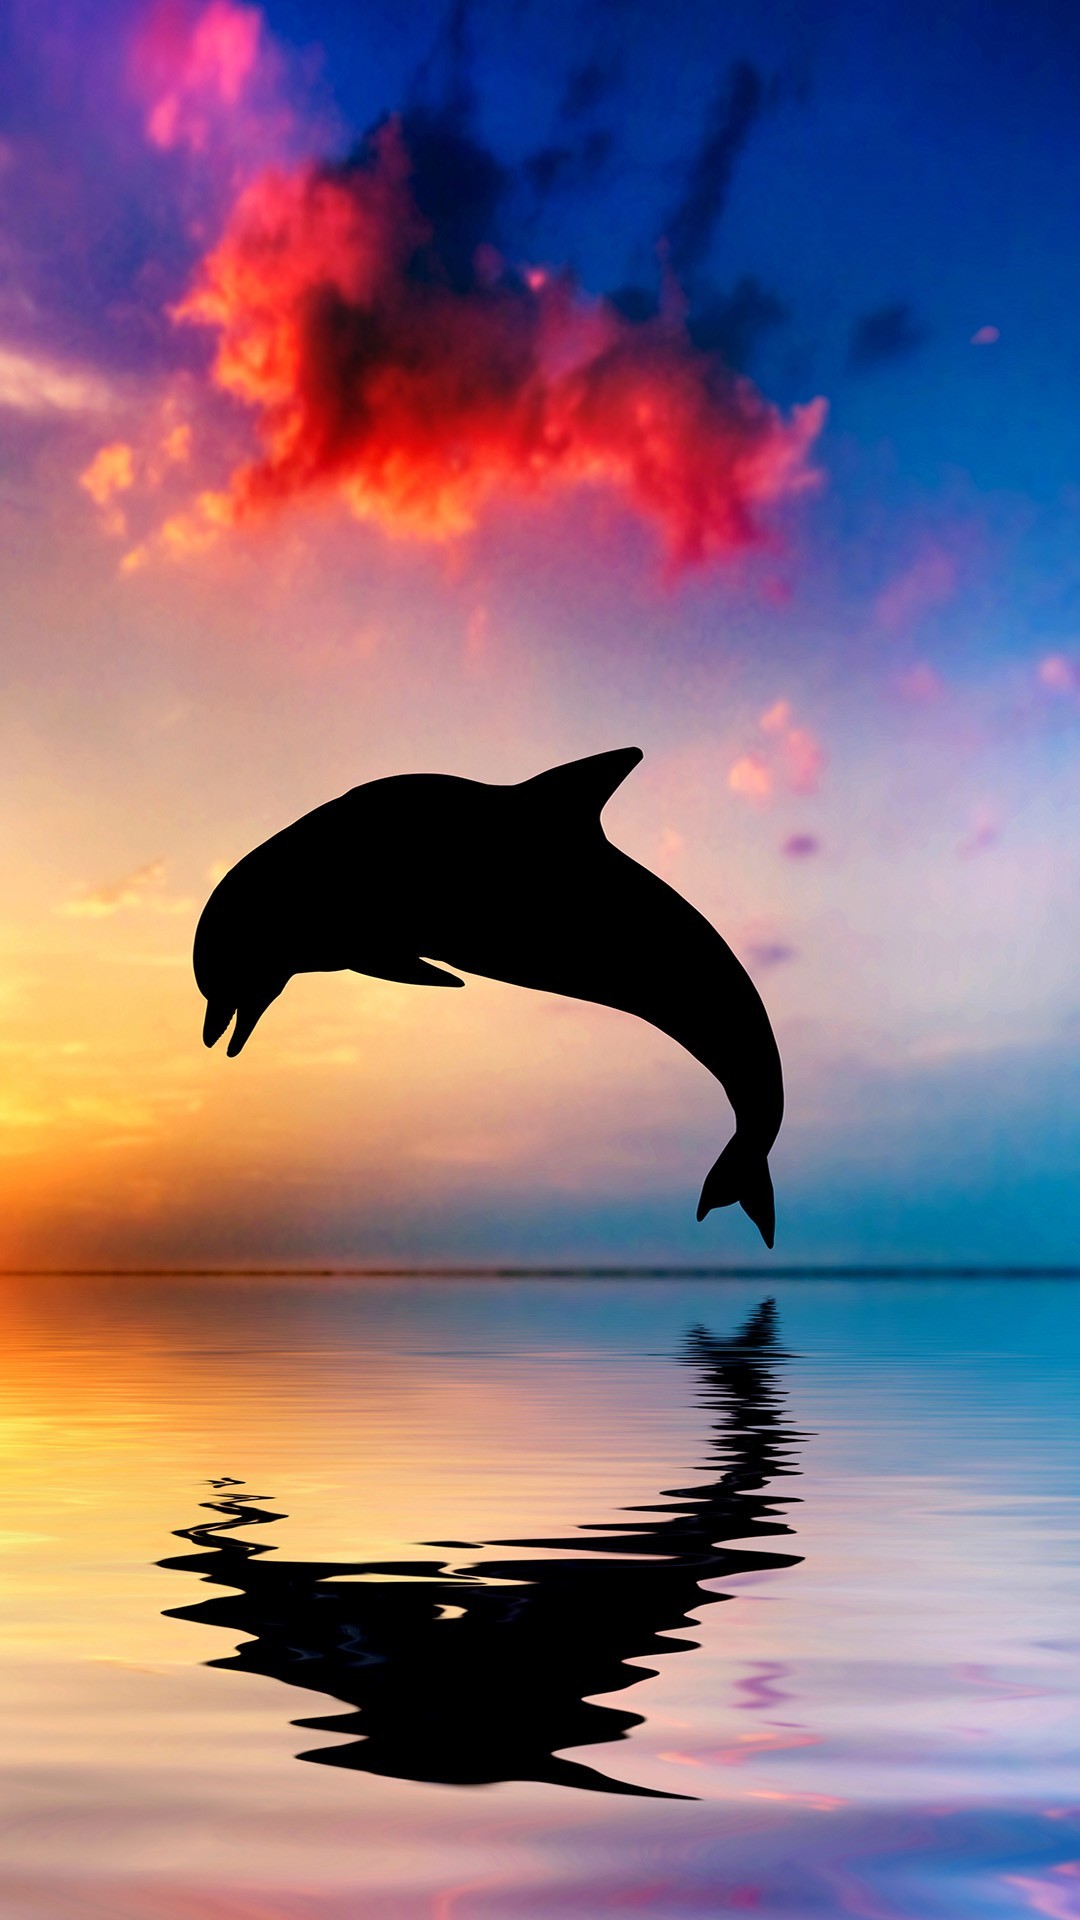 1080x1920, Free Android Wallpapers Hd - Beautiful Ocean And Sunset With Dolphin Jumping , HD Wallpaper & Backgrounds